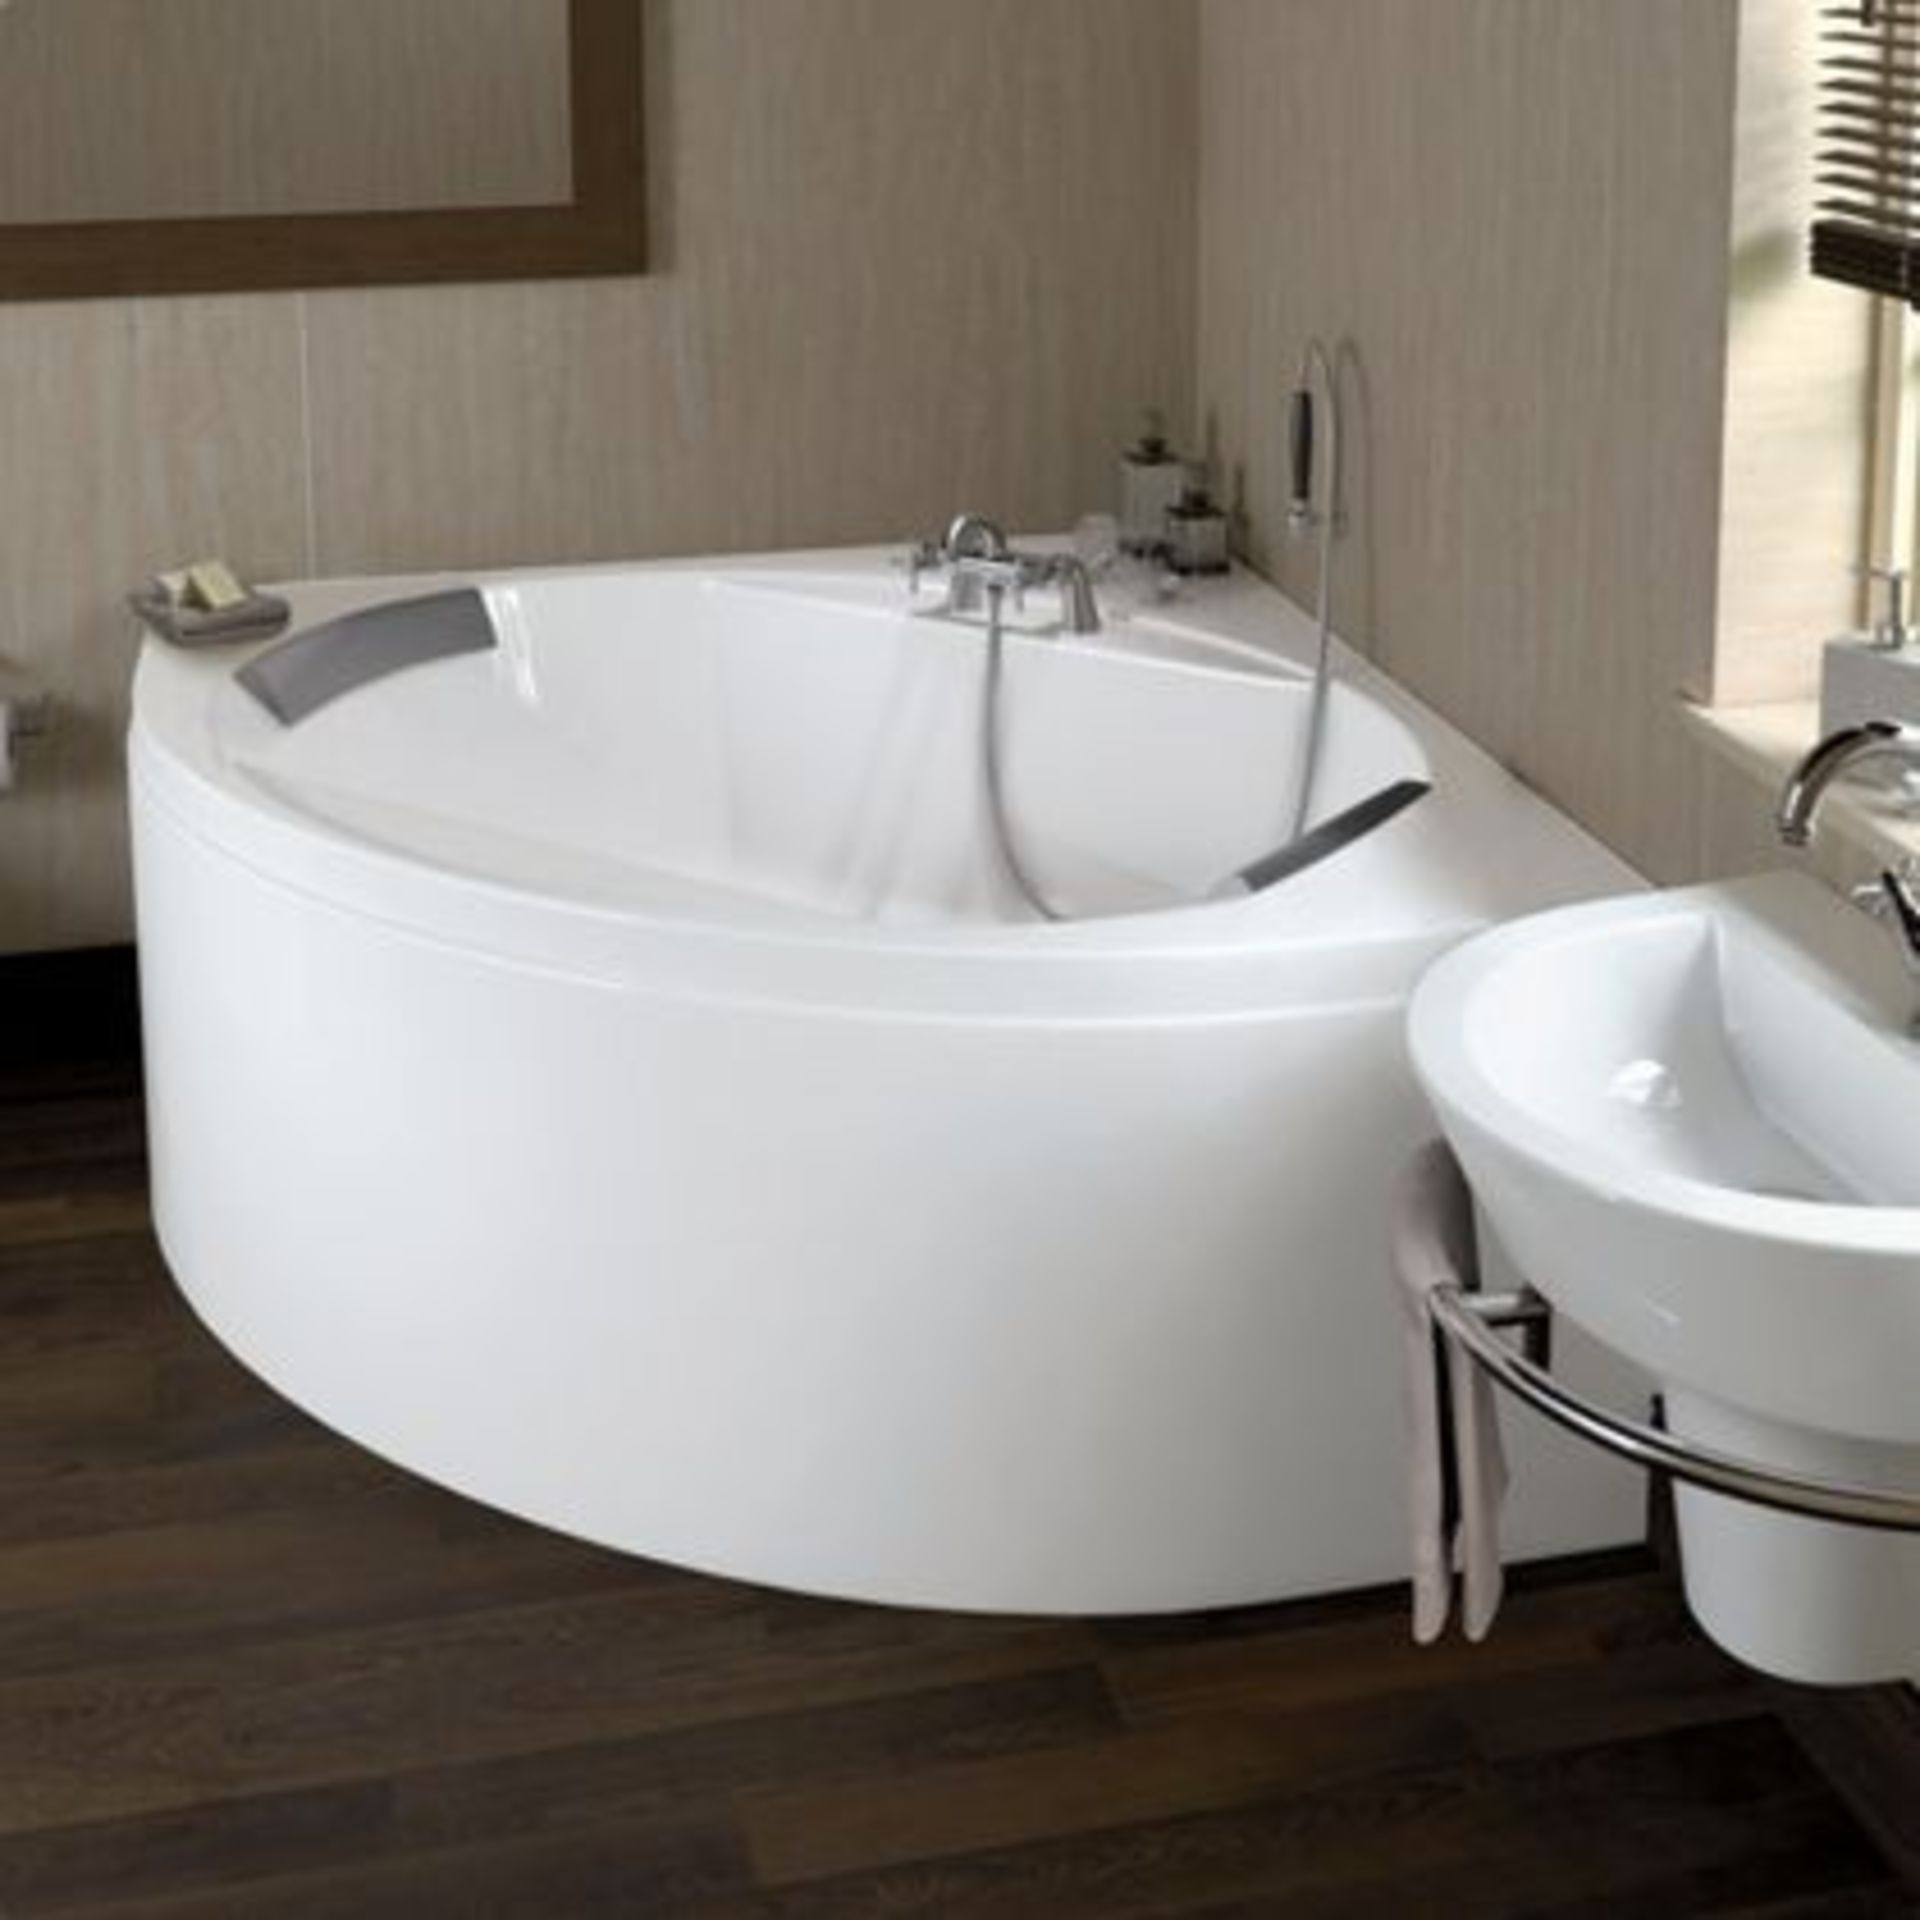 RO | 1 x OLNEY LUXURY CORNER BATH GOLD WHIRLPOOL RRP of Pallet - £762.99 Delivery charged at £50 +